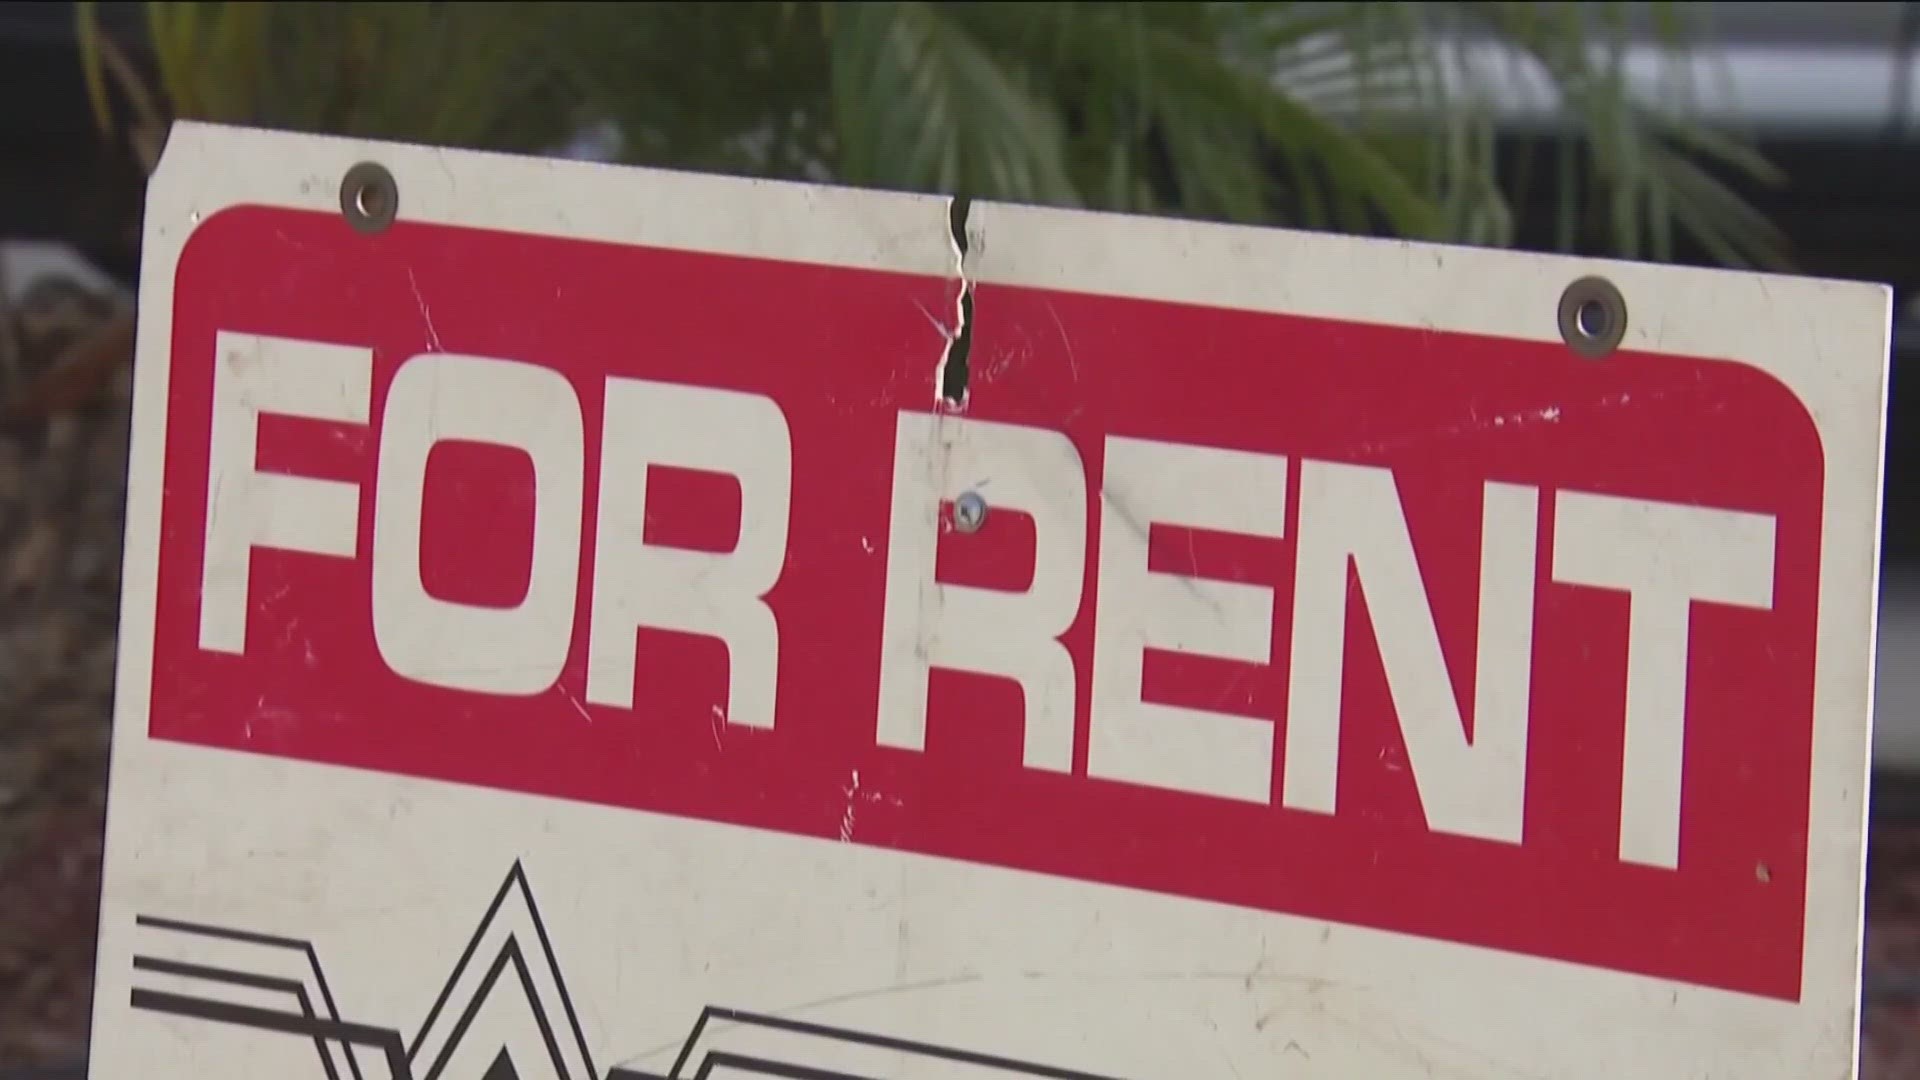 Cities and counties across the country are pushing measures aimed at stabilizing or controlling rents at a time when housing prices are skyrocketing.